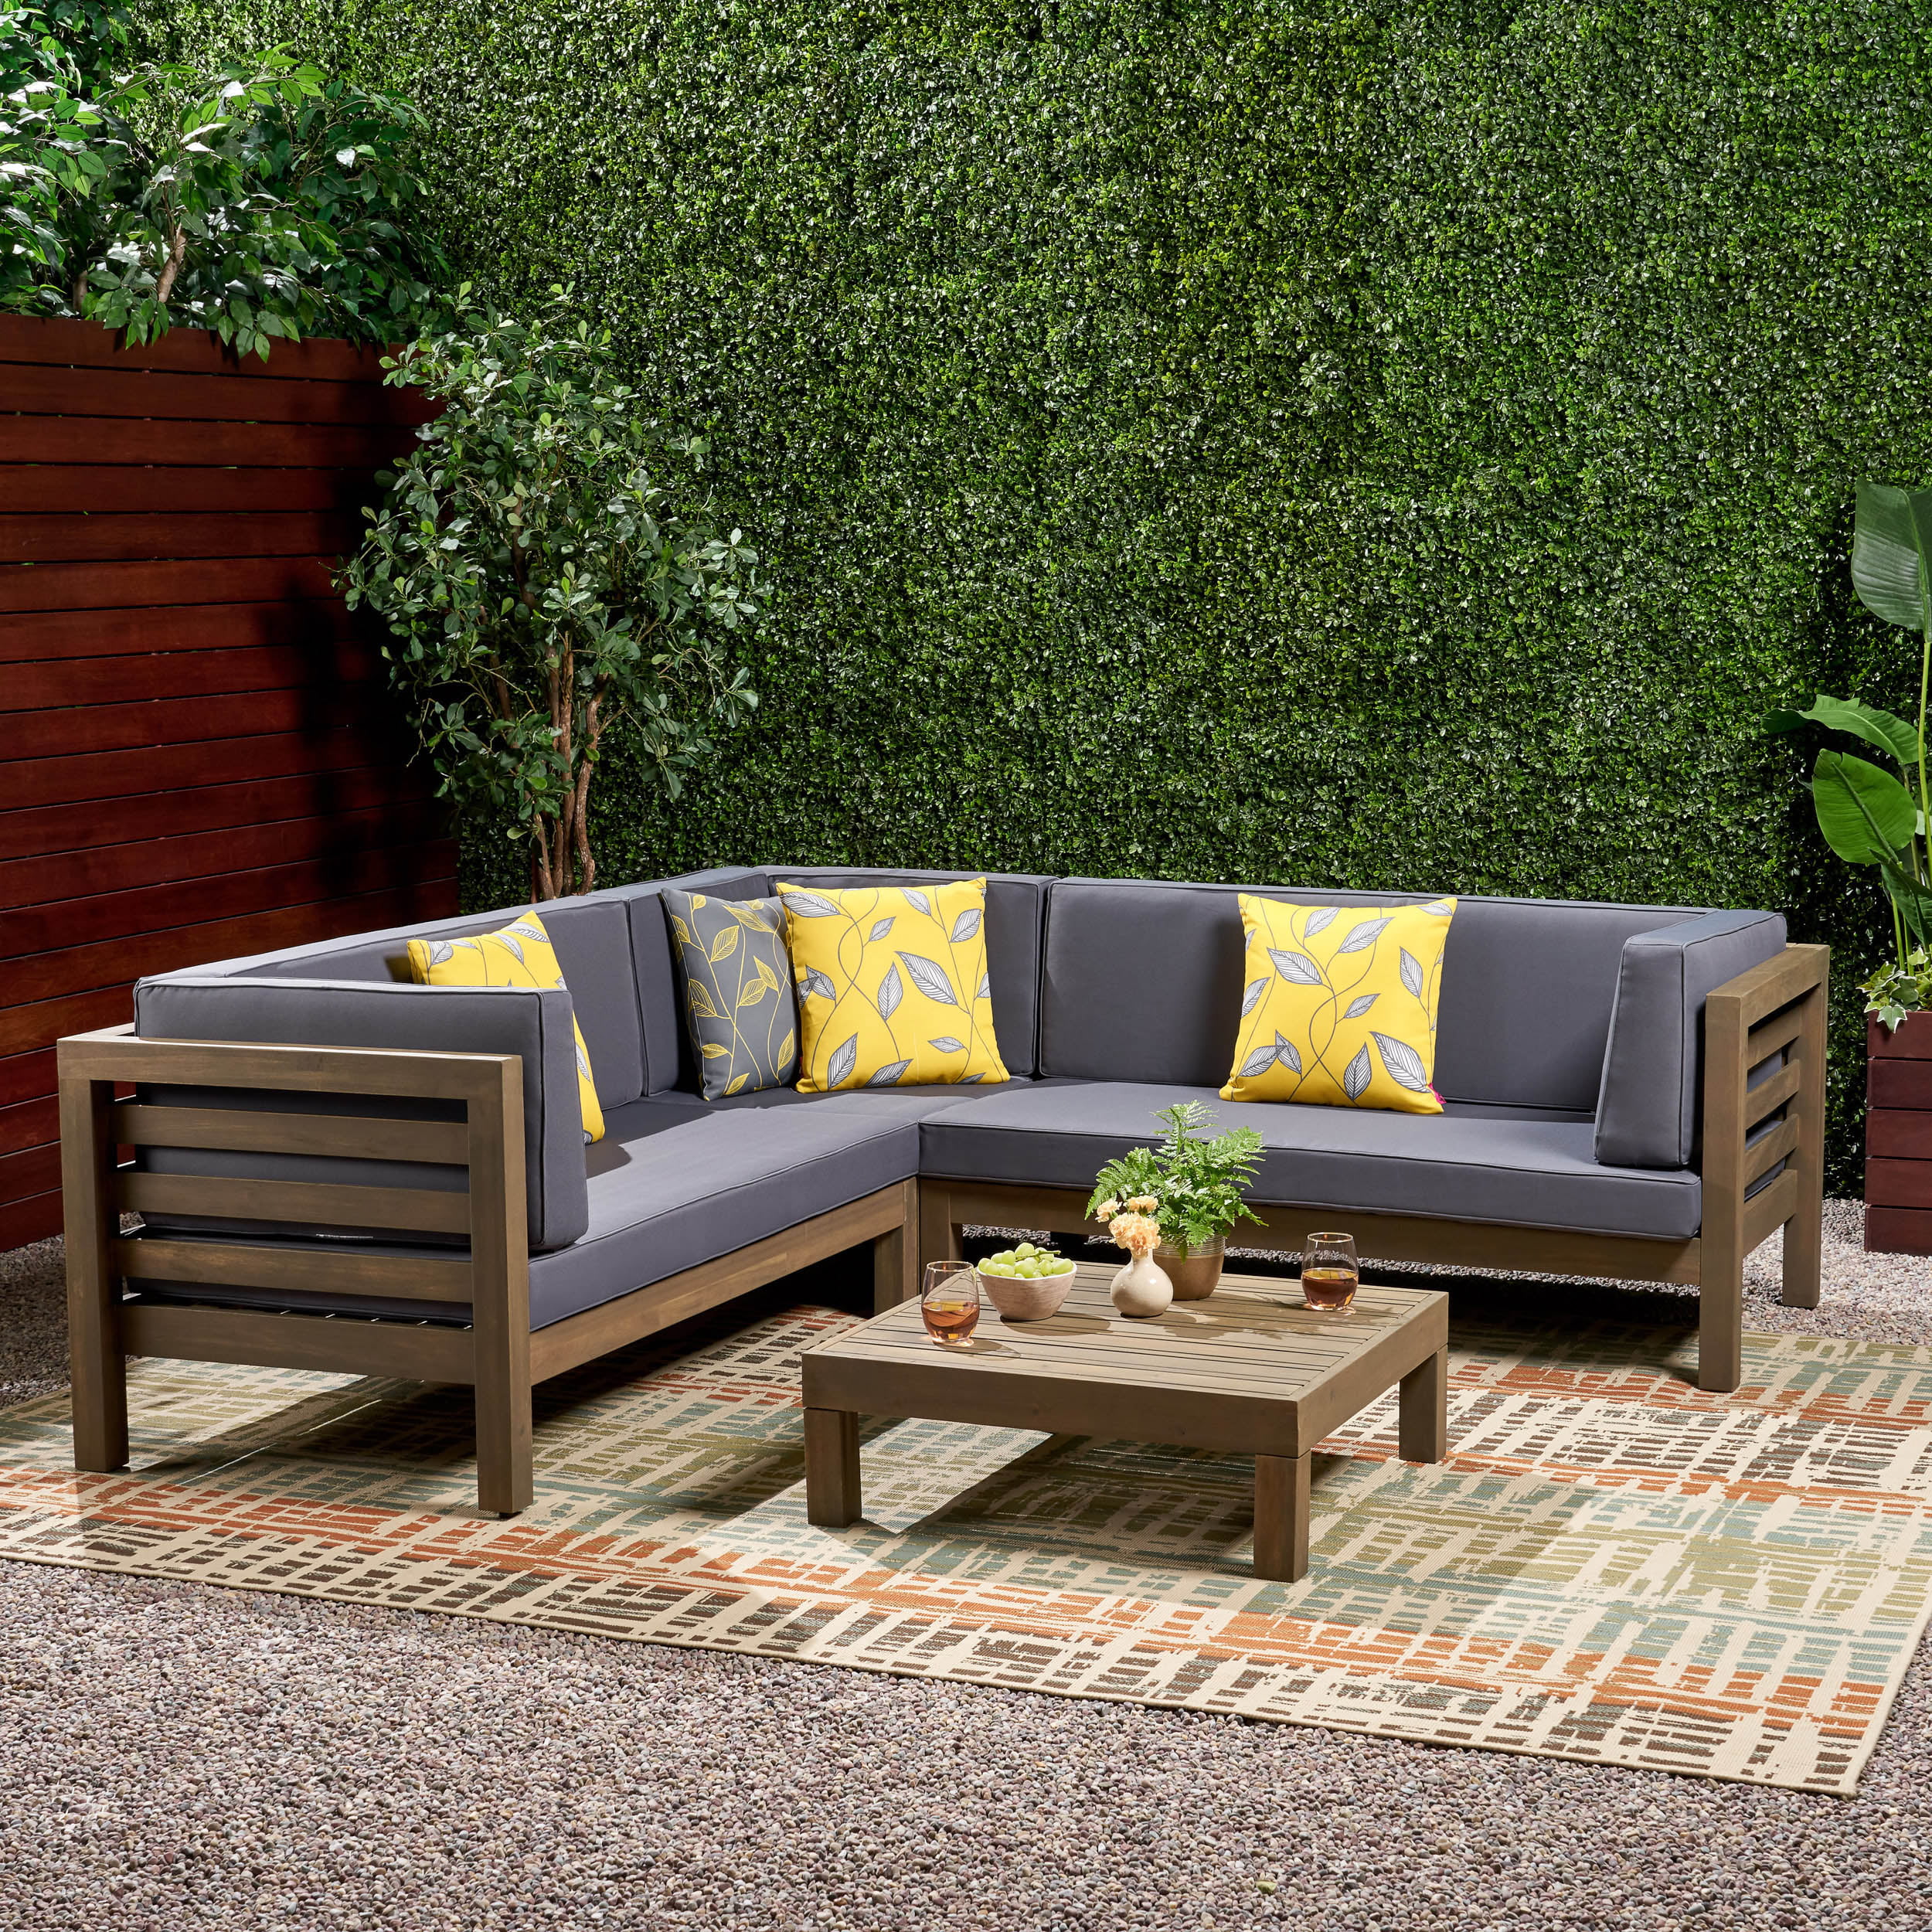 Argentine 4 Piece Outdoor Wooden Sectional Set With Cushions Grey